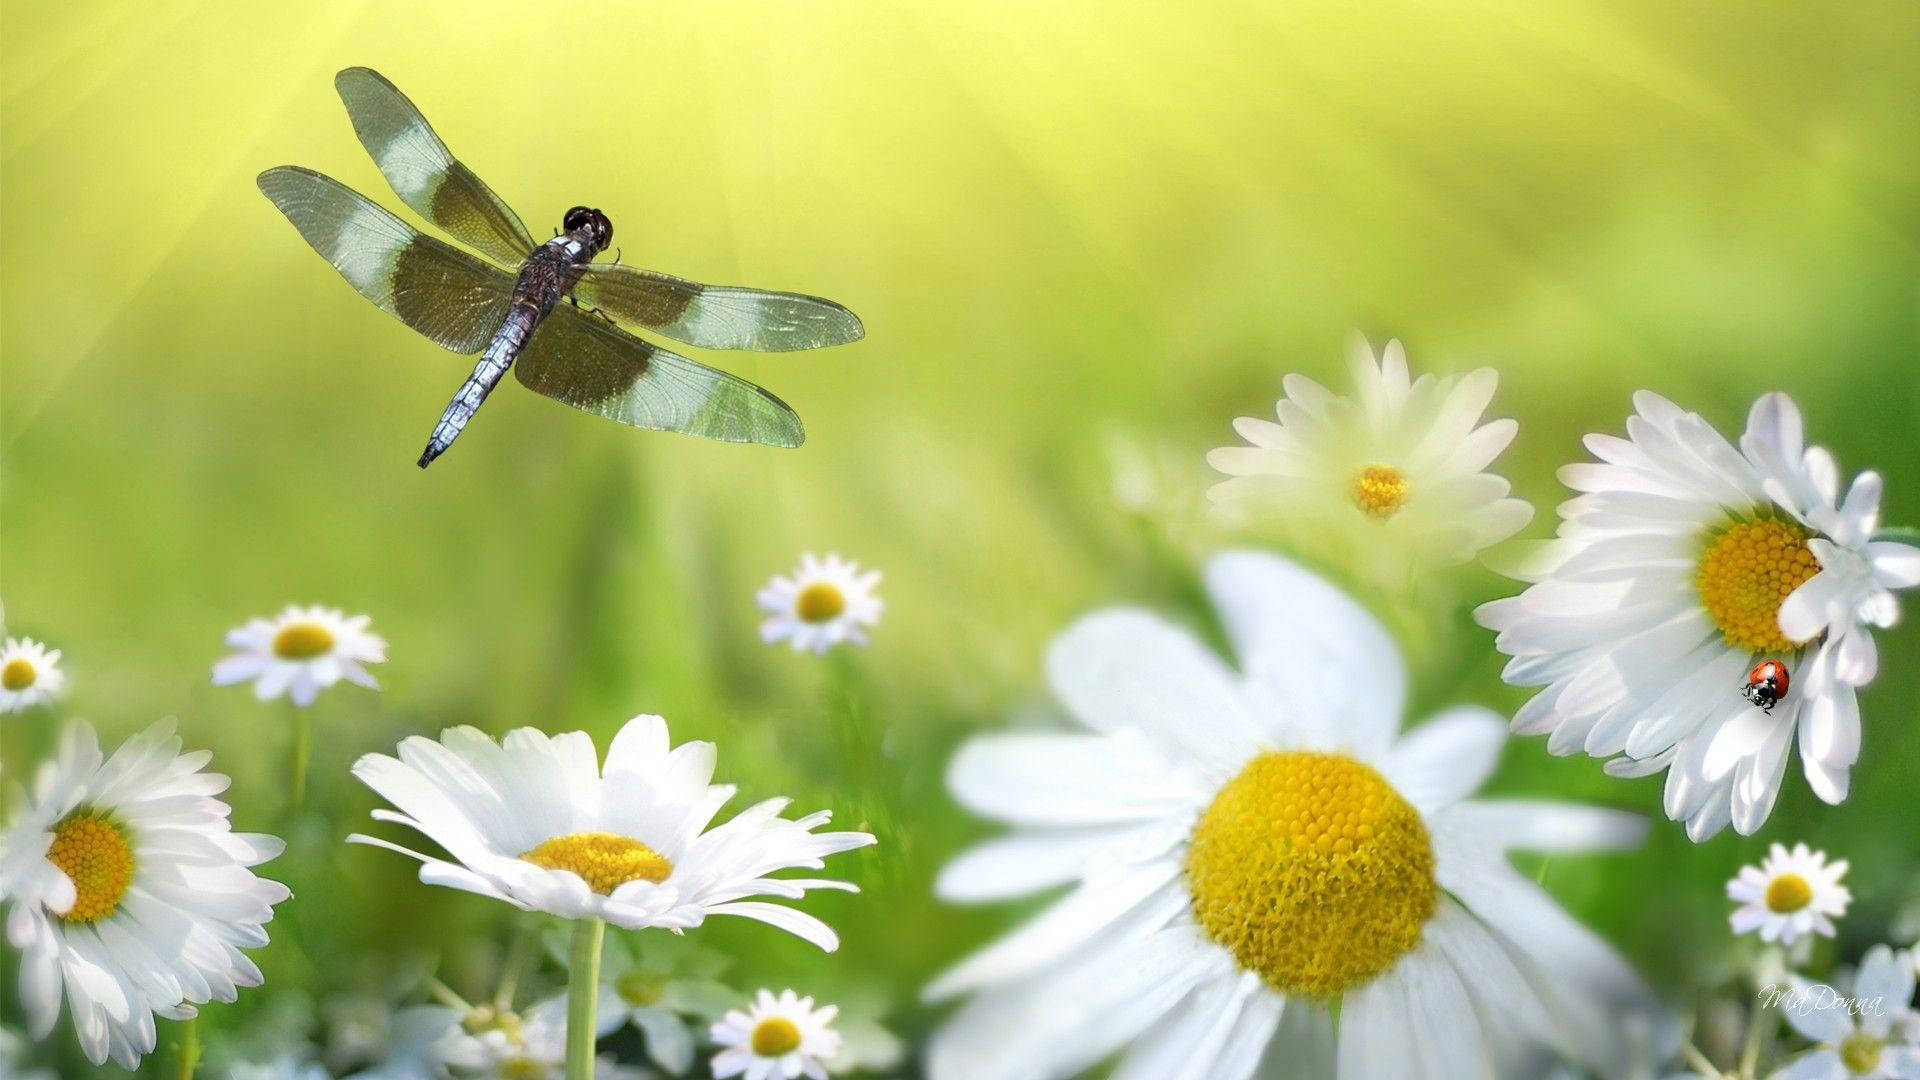 Dragonfly Above White Daisies Wallpaper